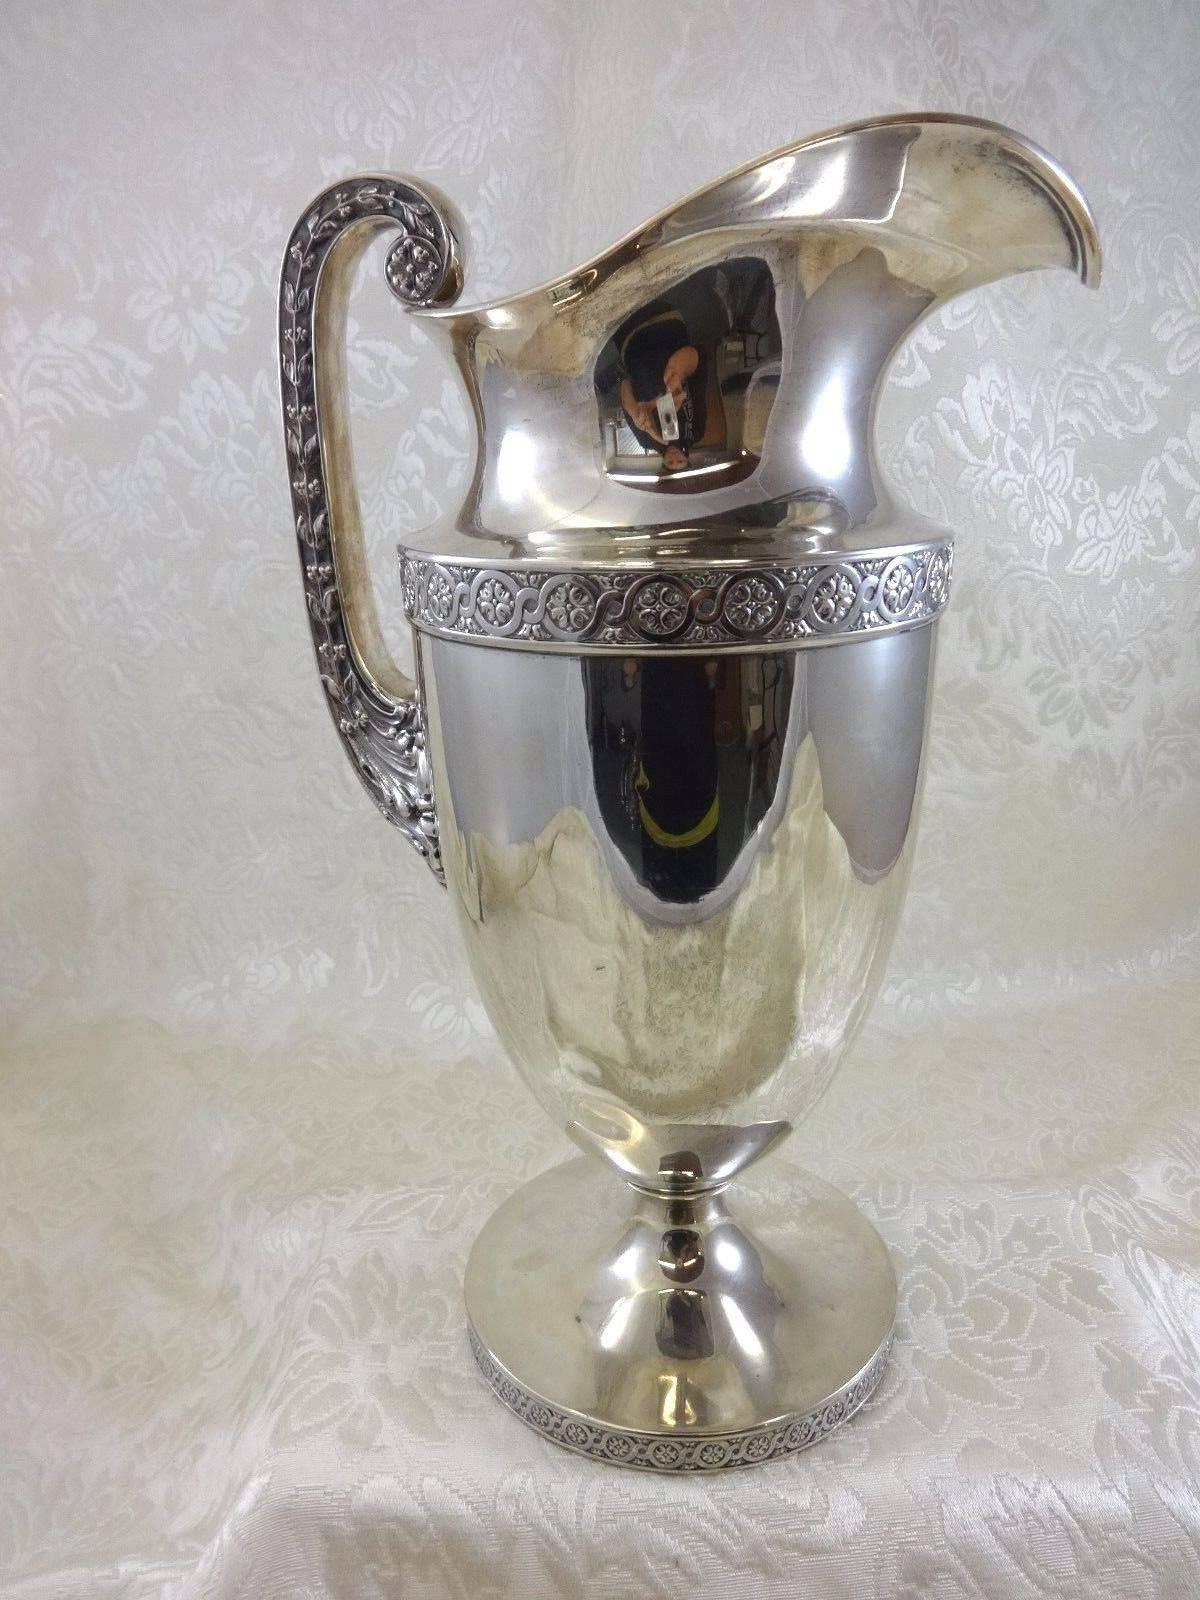 Gorham.

Exceptional Gorham Grecian style monumental sterling silver water pitcher 15" tall x 9" wide and holds 6 1/2" pints. It bears the sword date mark, circa 1915. Weight - 53 troy ounces. It is monogrammed with a lovely vintage